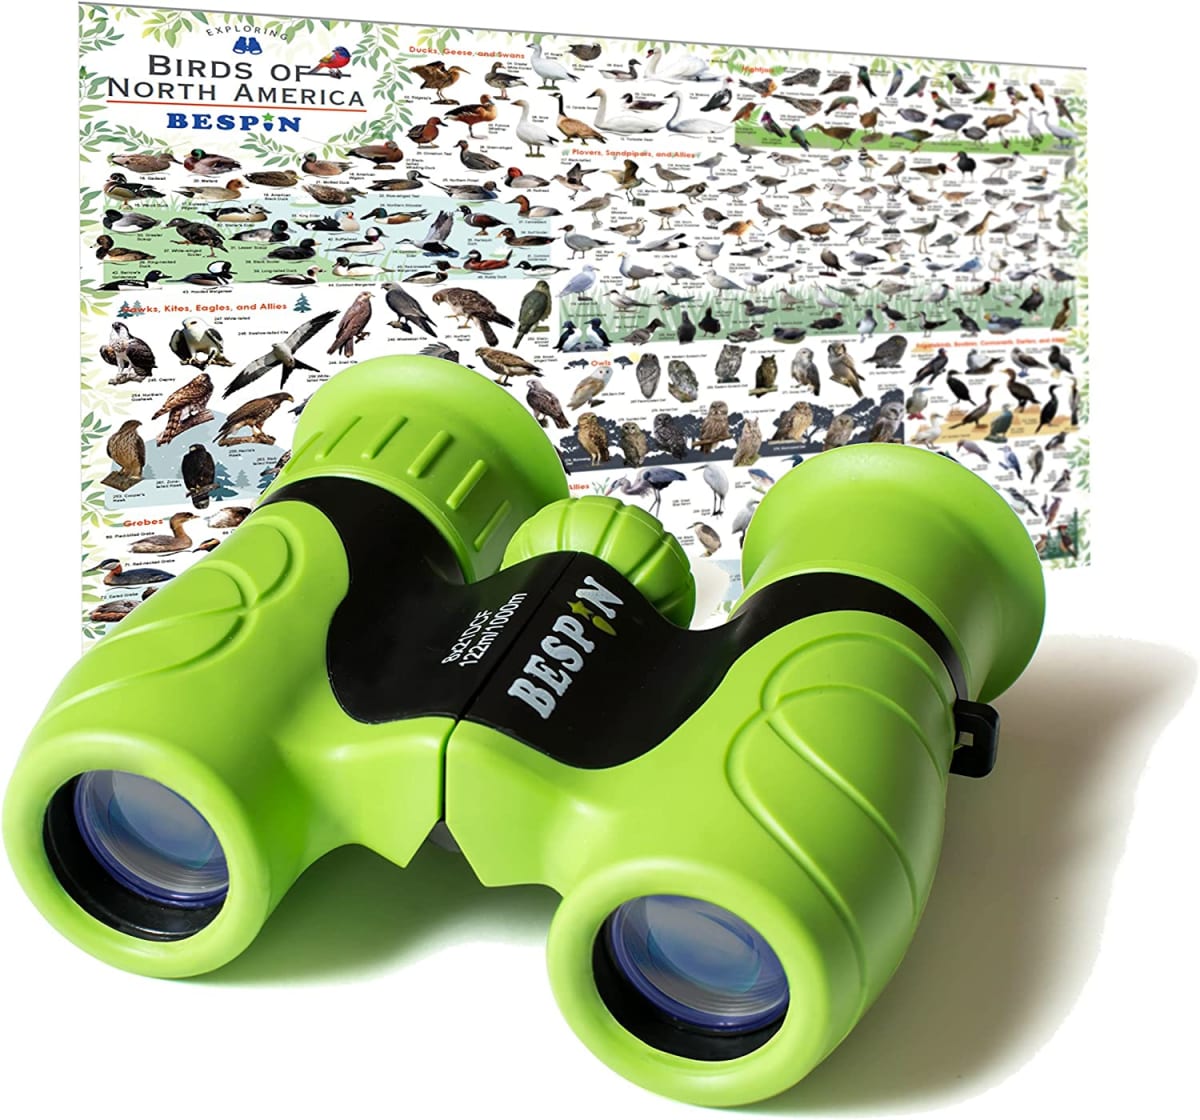 Binoculars for Kids (Adopted by Nature School) 8x21 Bird Watching, High-Resolution Real Optics for Wildlife Watching with Reversible Bird Map - GR -